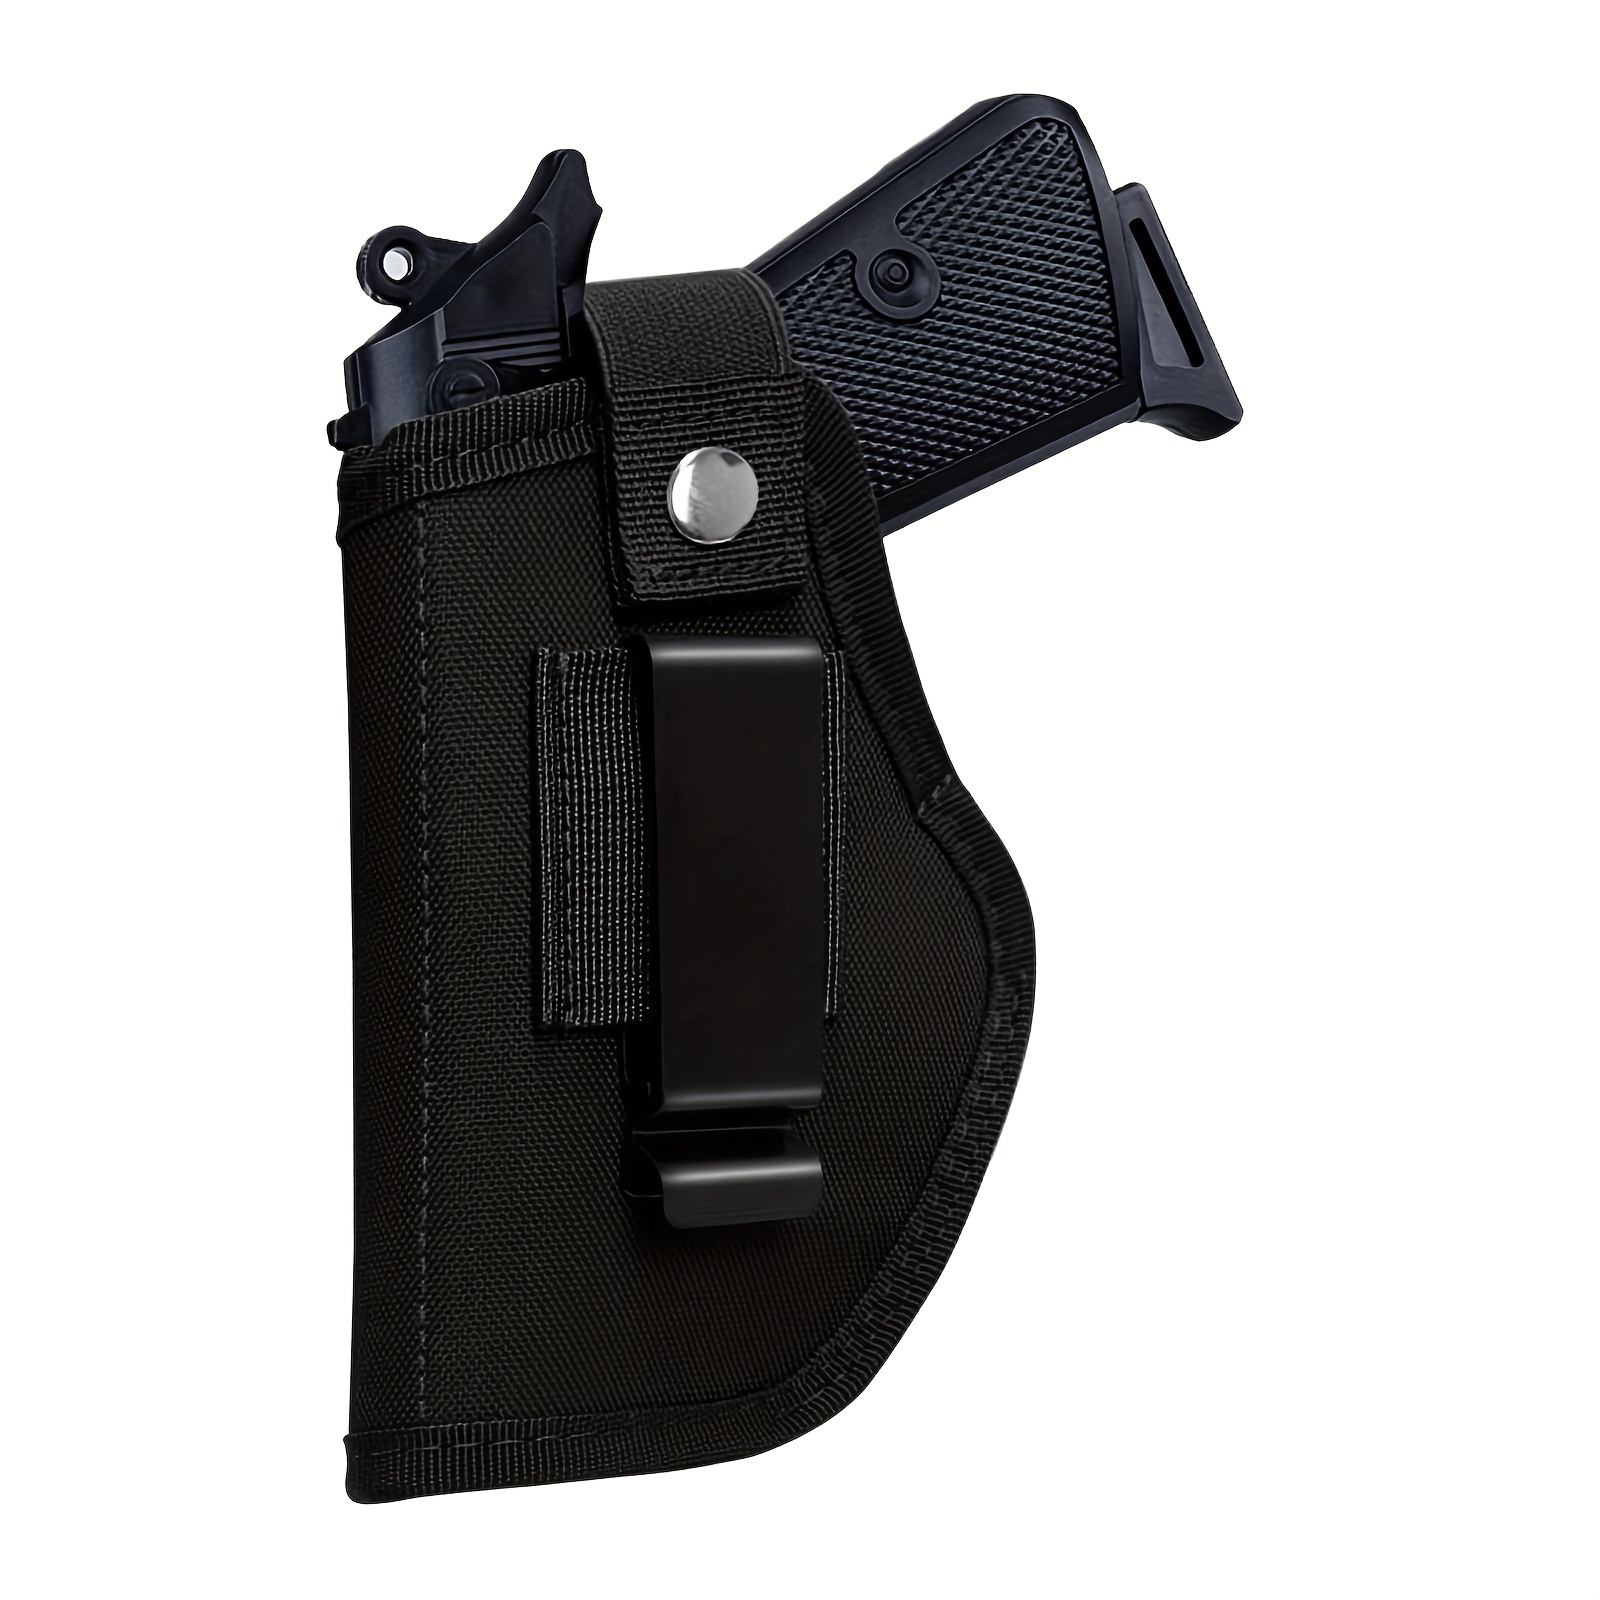  CCW Tactical Shoulder Holster for Deep Concealment Underarm Gun  Holster for Men and Women, Fits Most Handguns, Black, M, LH Draw, Holster  Under Right Arm : Sports & Outdoors